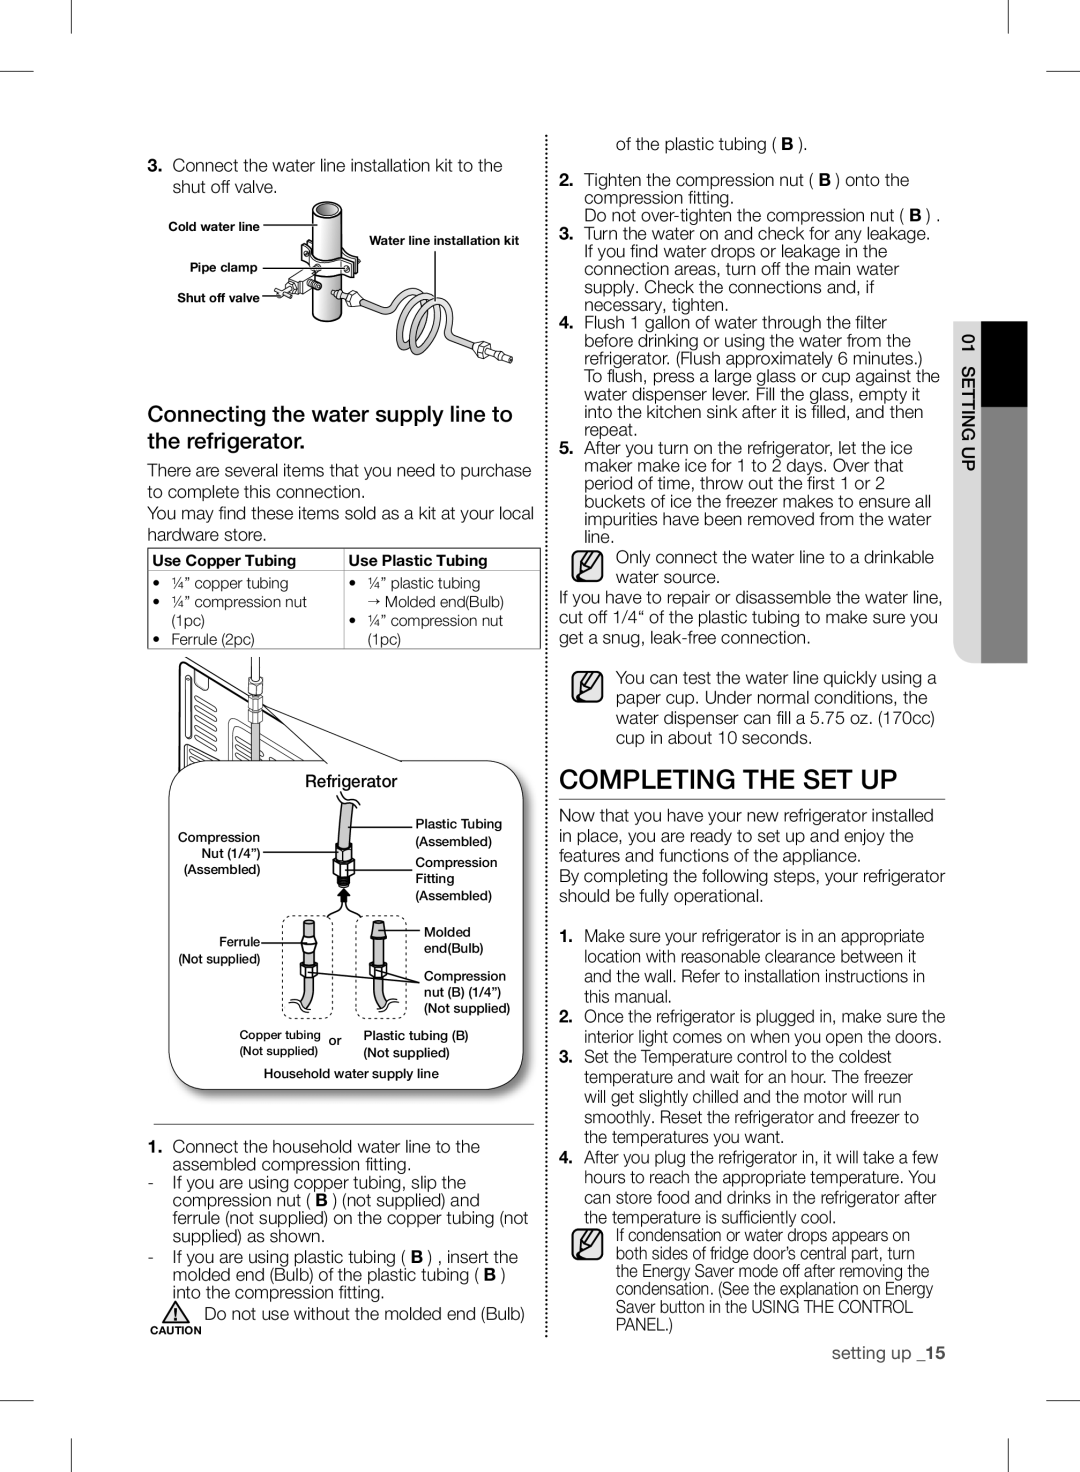 Samsung RF24FSEDBSR user manual Completing The Set Up, setting up _15 